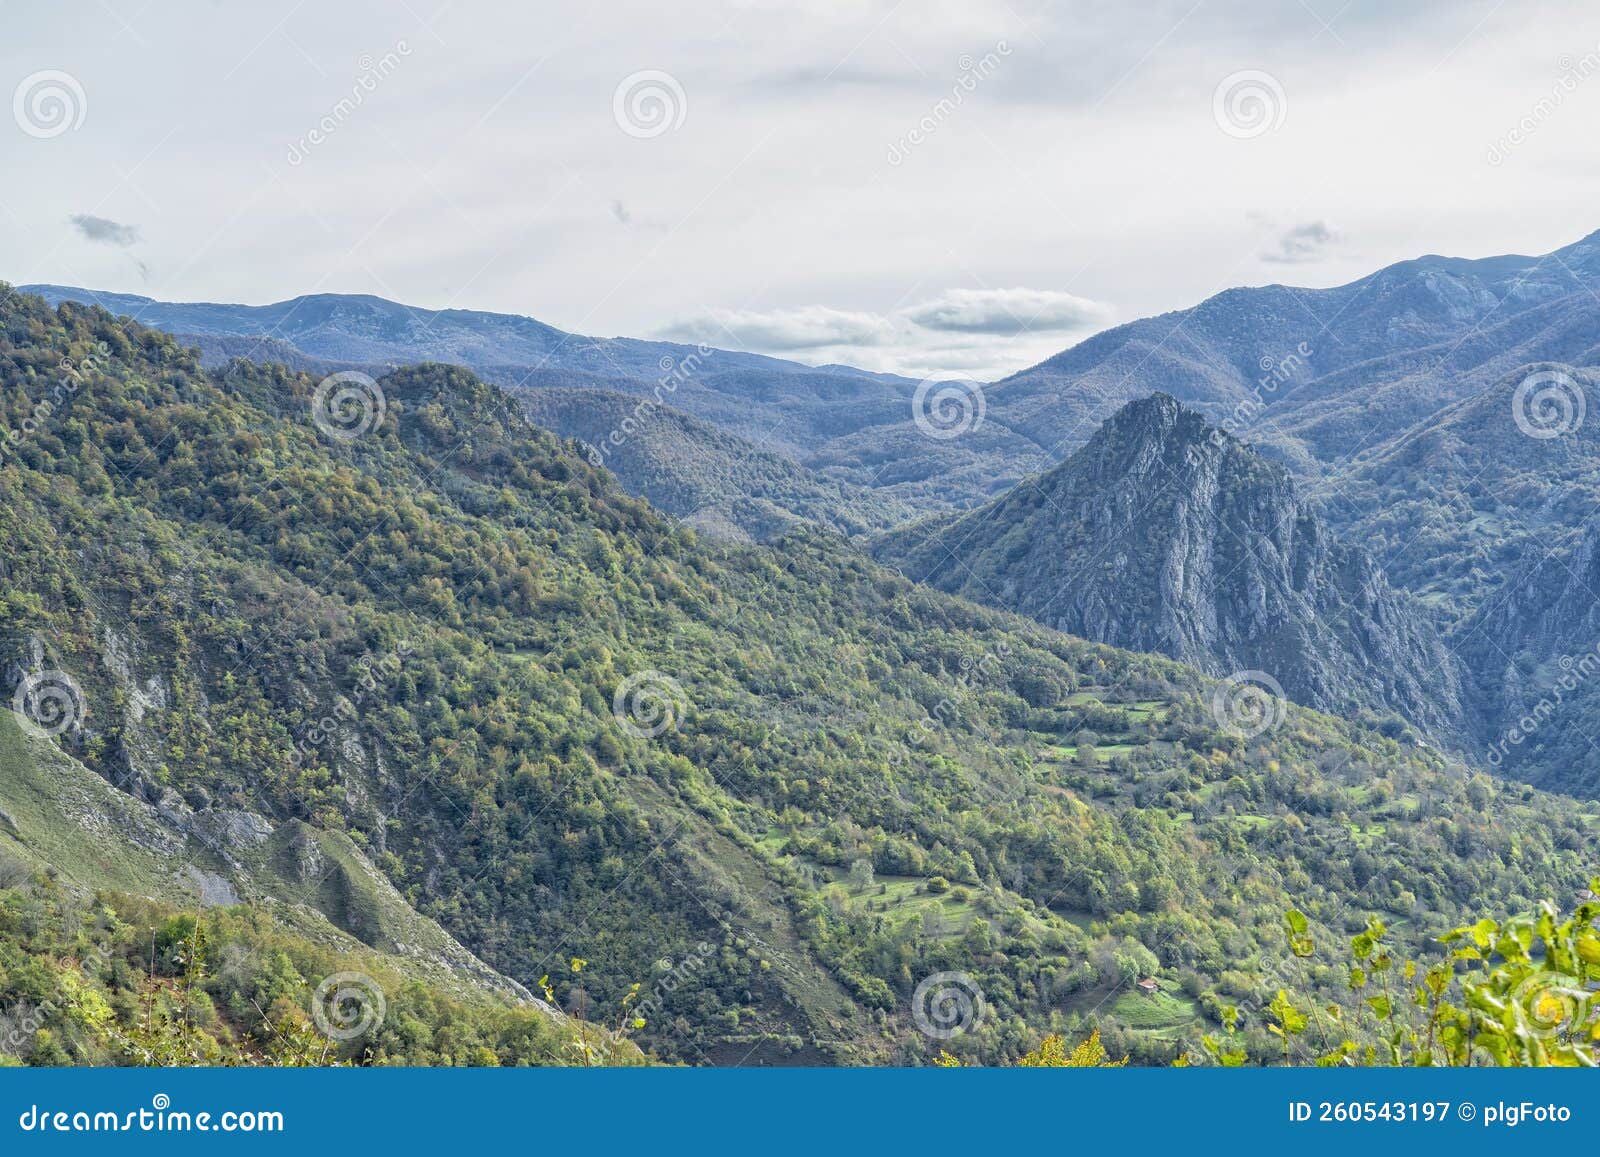 beech forest in autumn in soto de sajambre within the picos de europa national park in spain